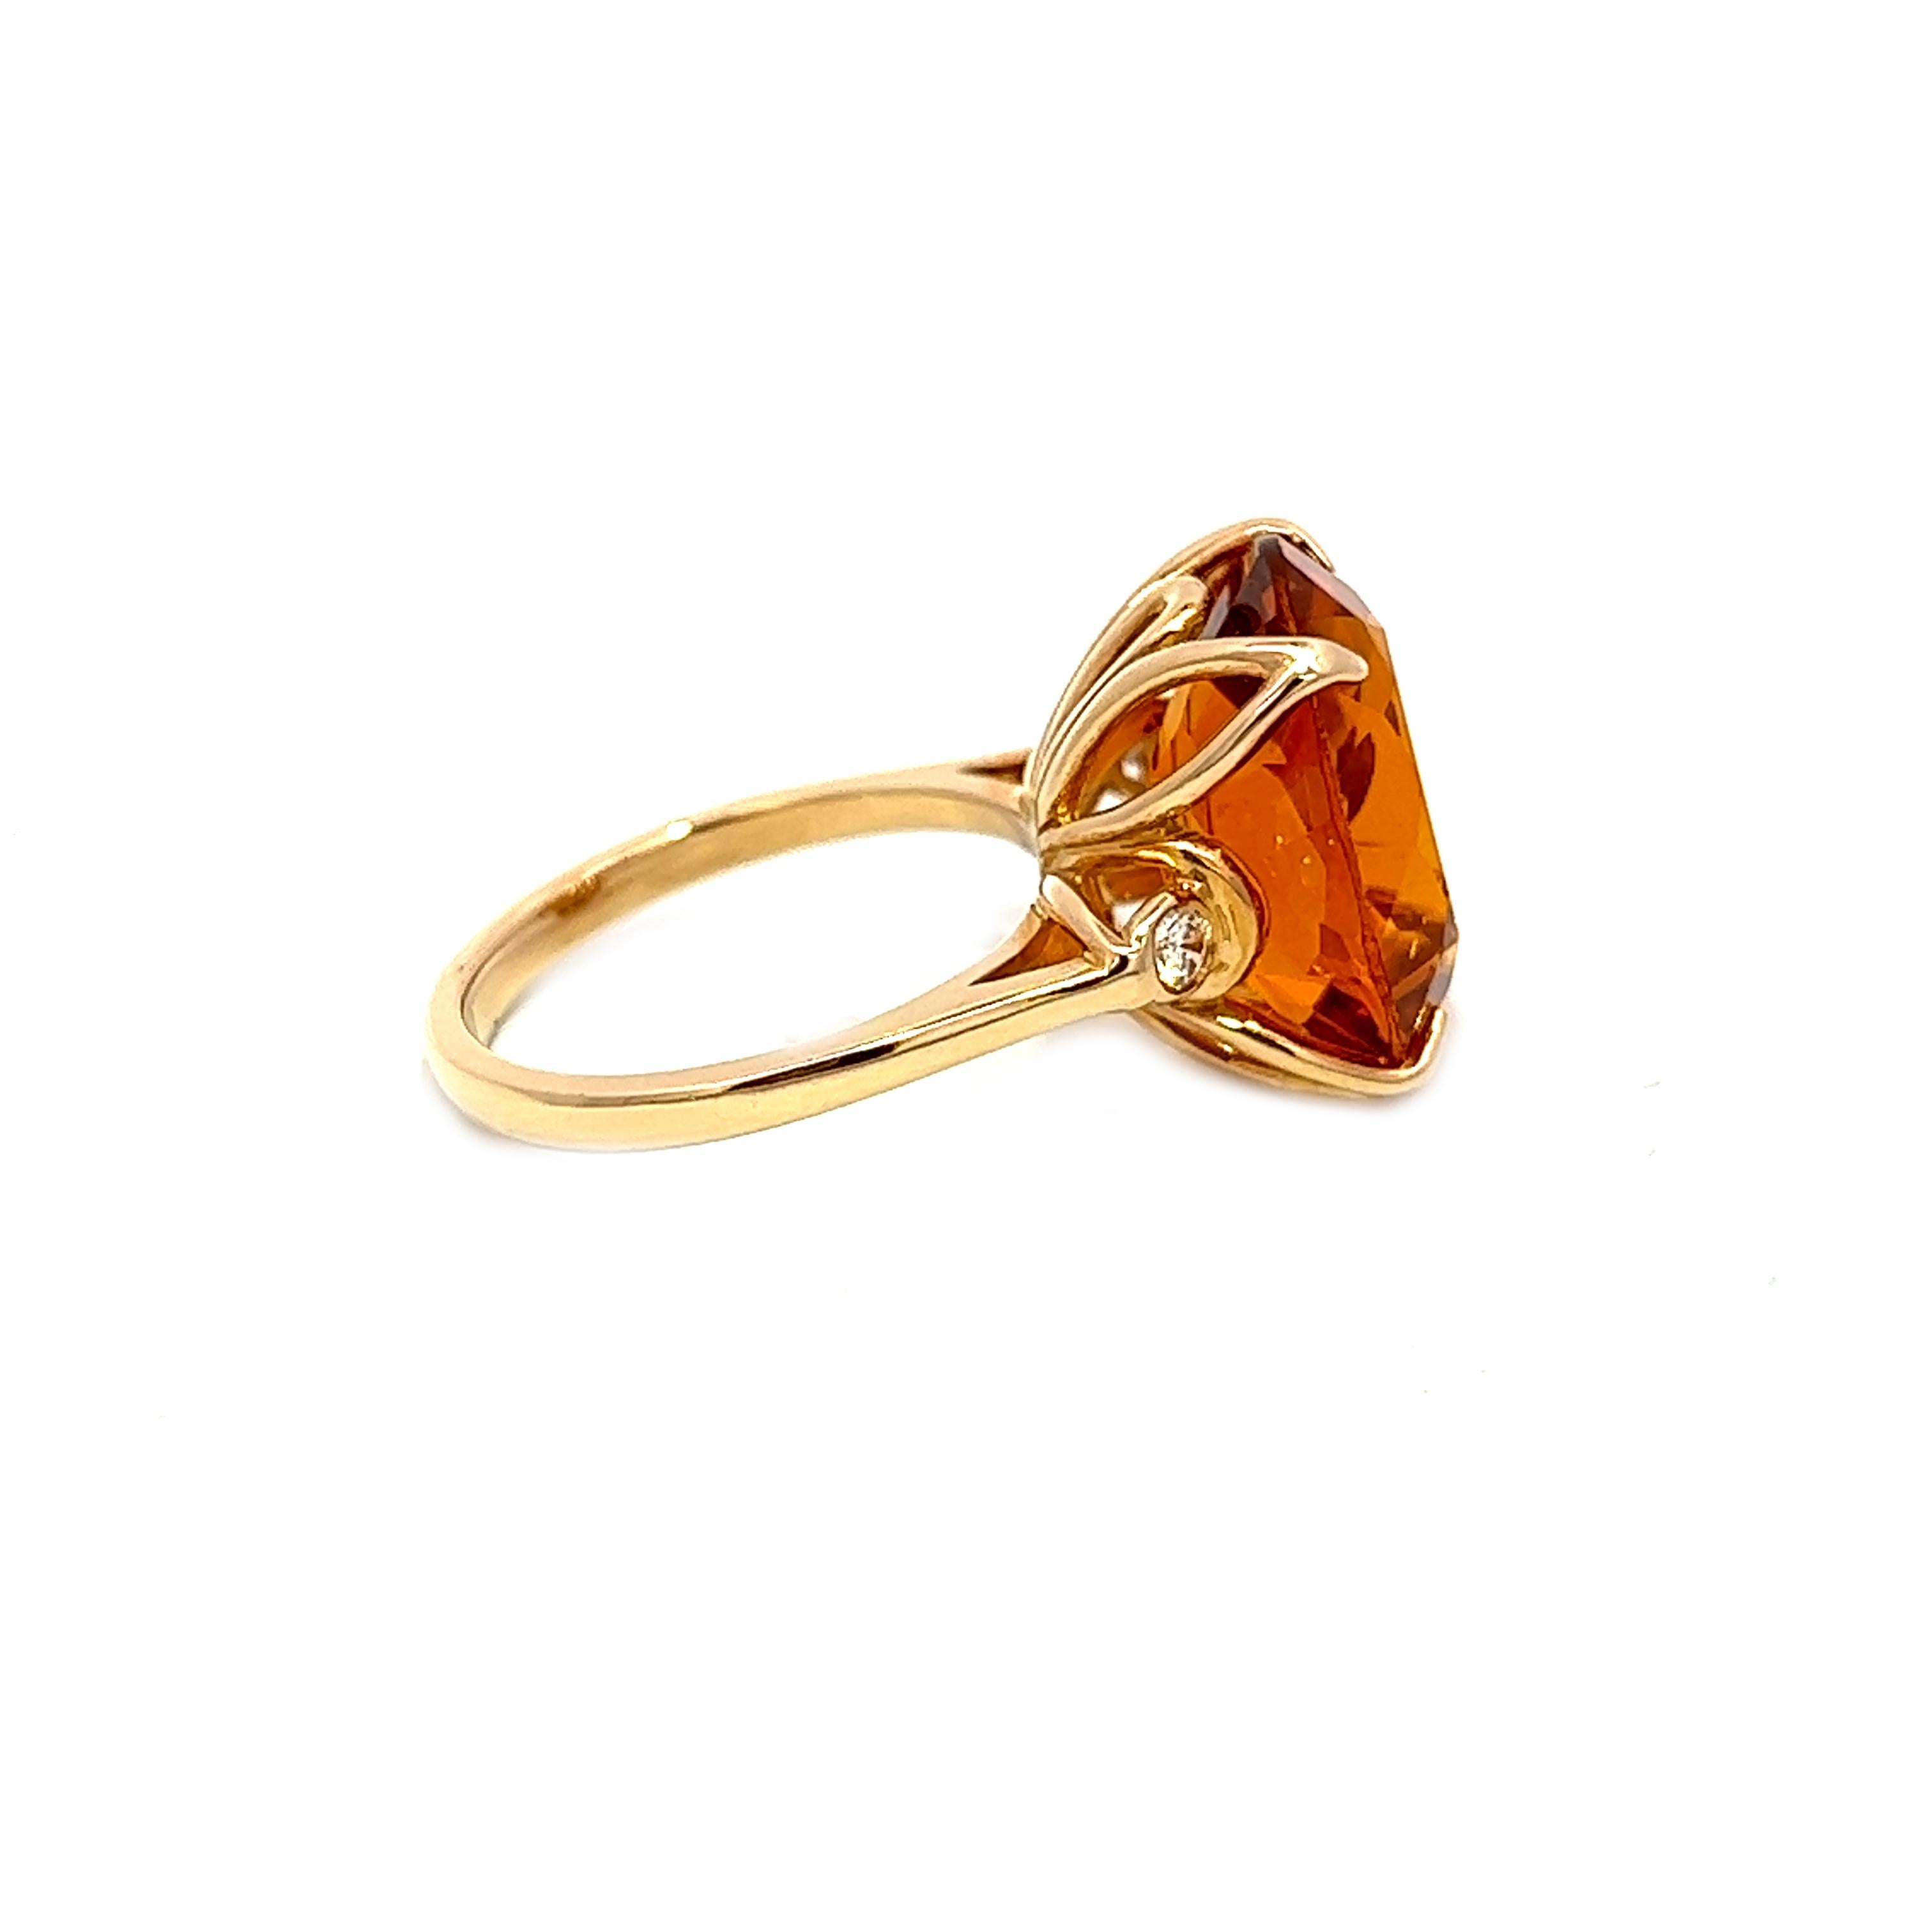 Oval Cut 9.33CT Total Weight Orange Topaz & Diamonds set in 14KY For Sale